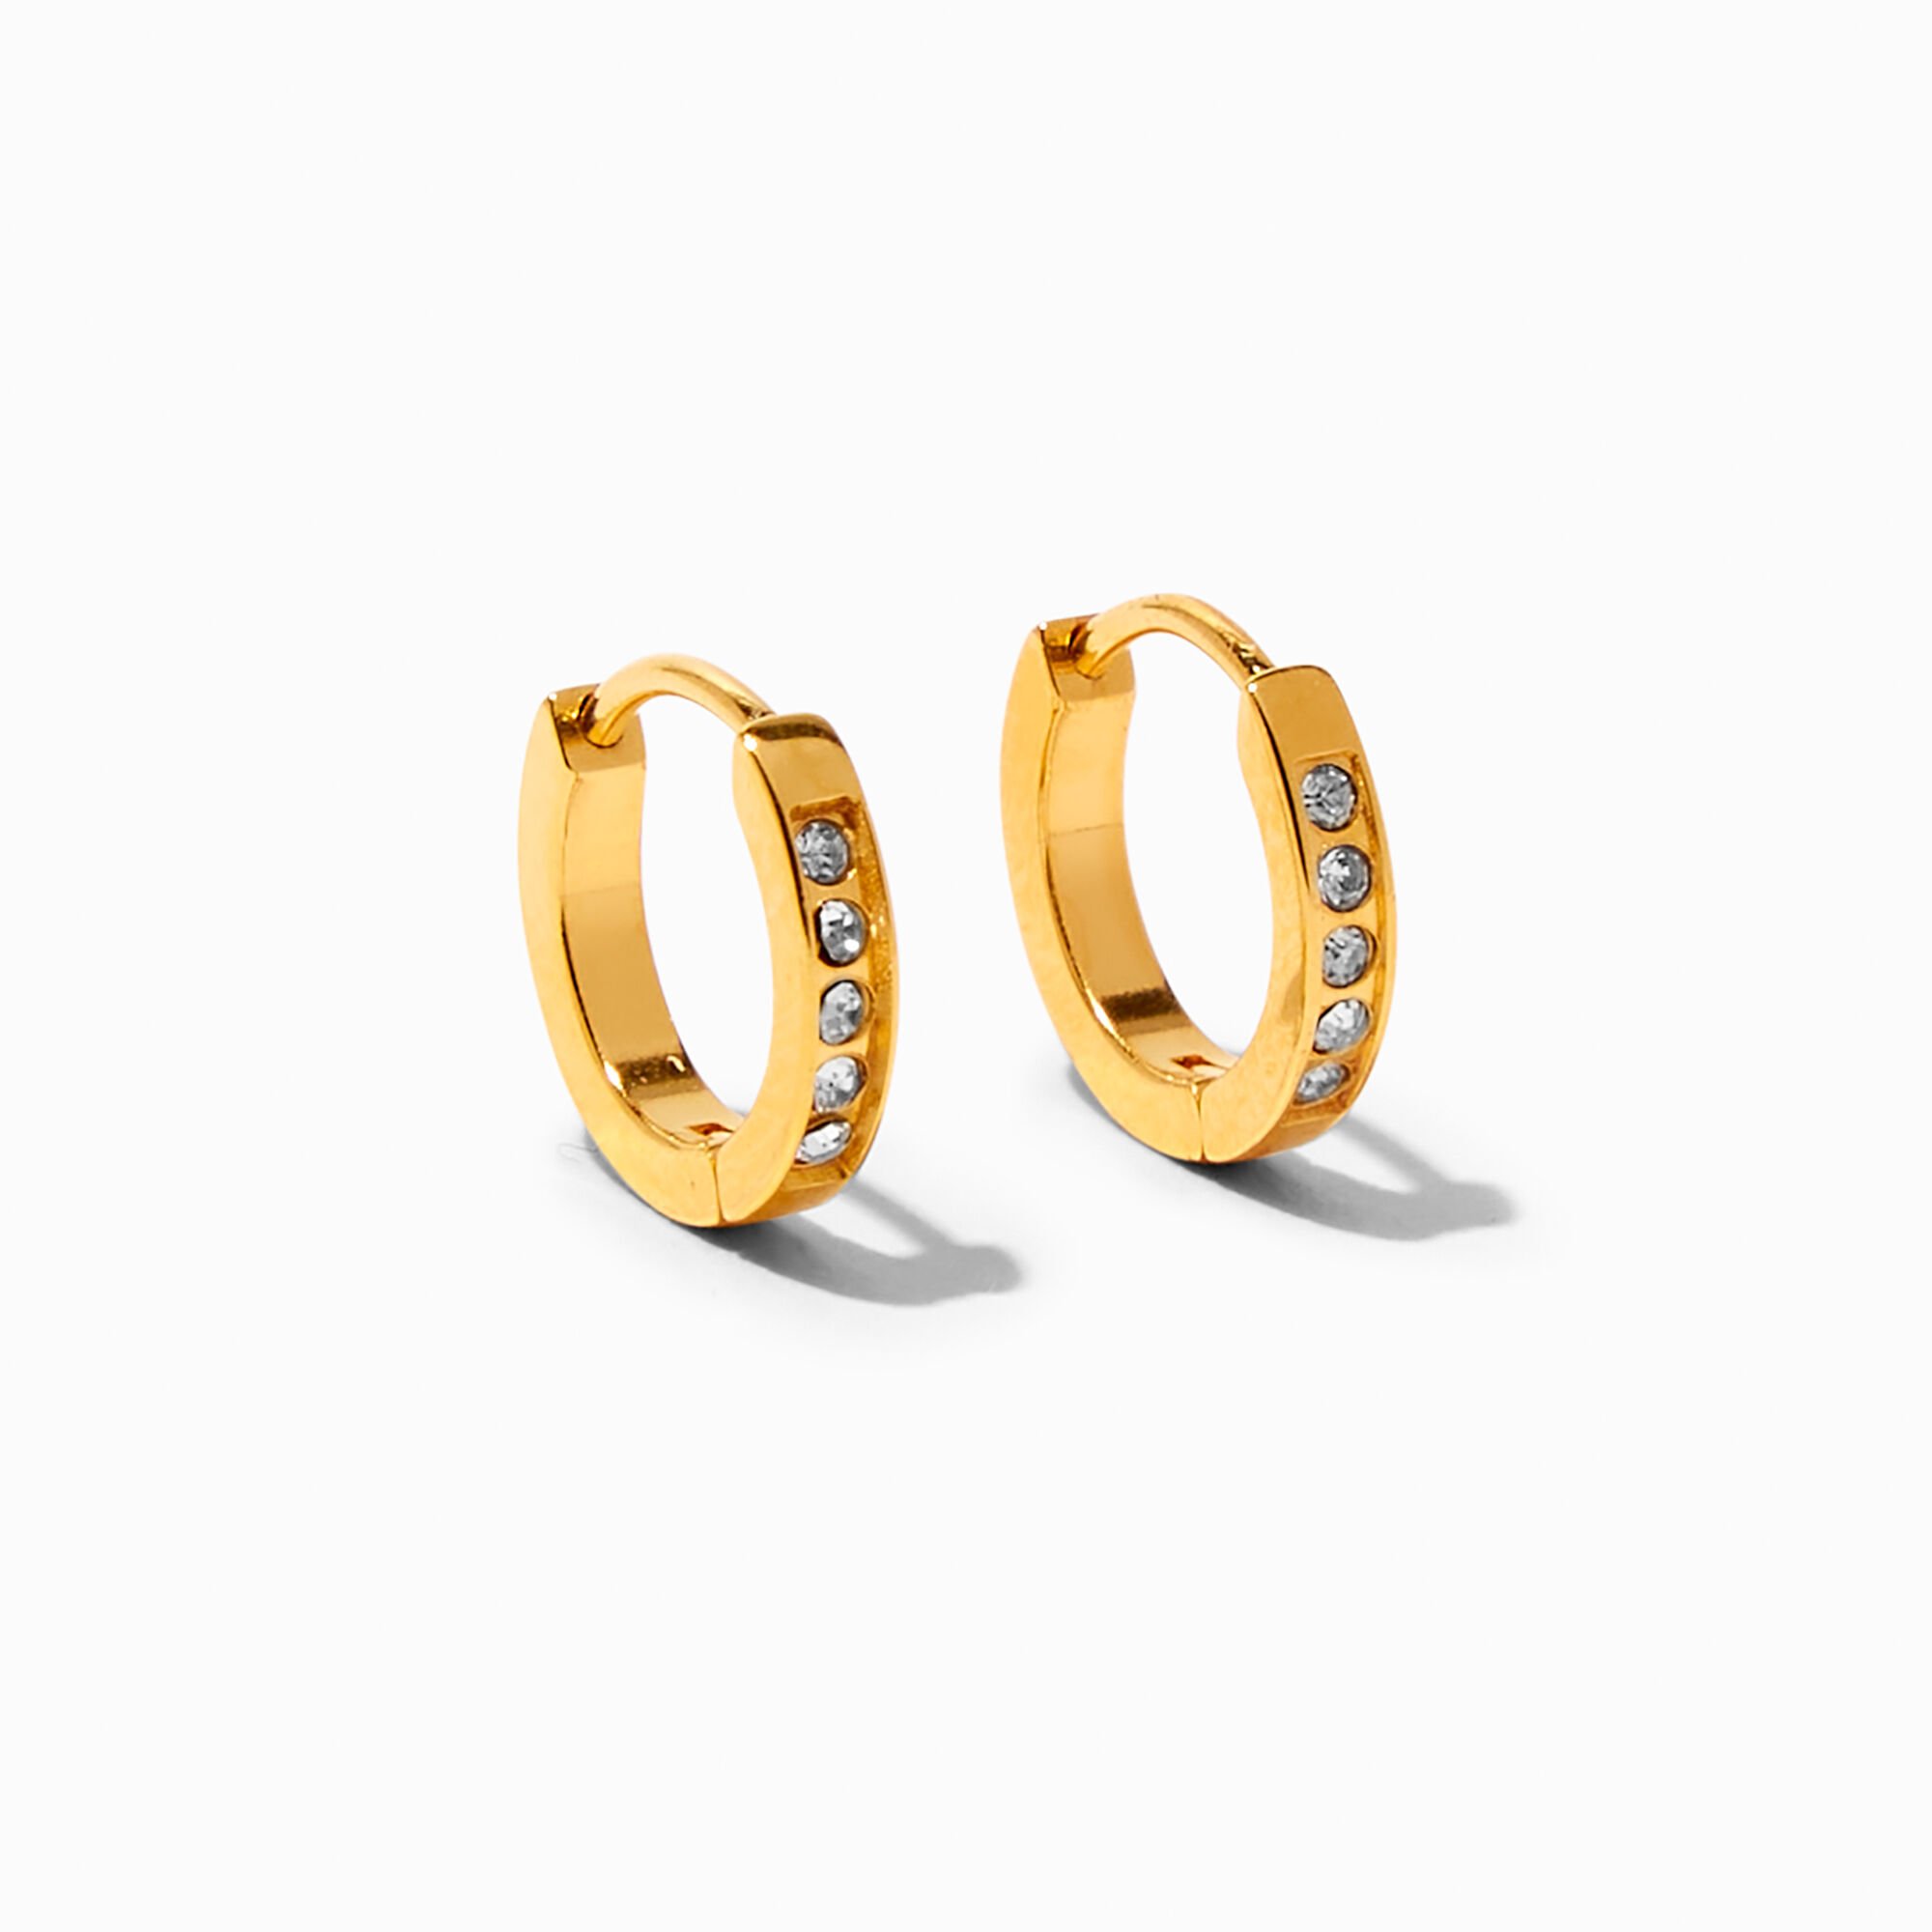 View C Luxe By Claires 18K Gold Plated Titanium 10MM Clicker Hoop Earrings Yellow information